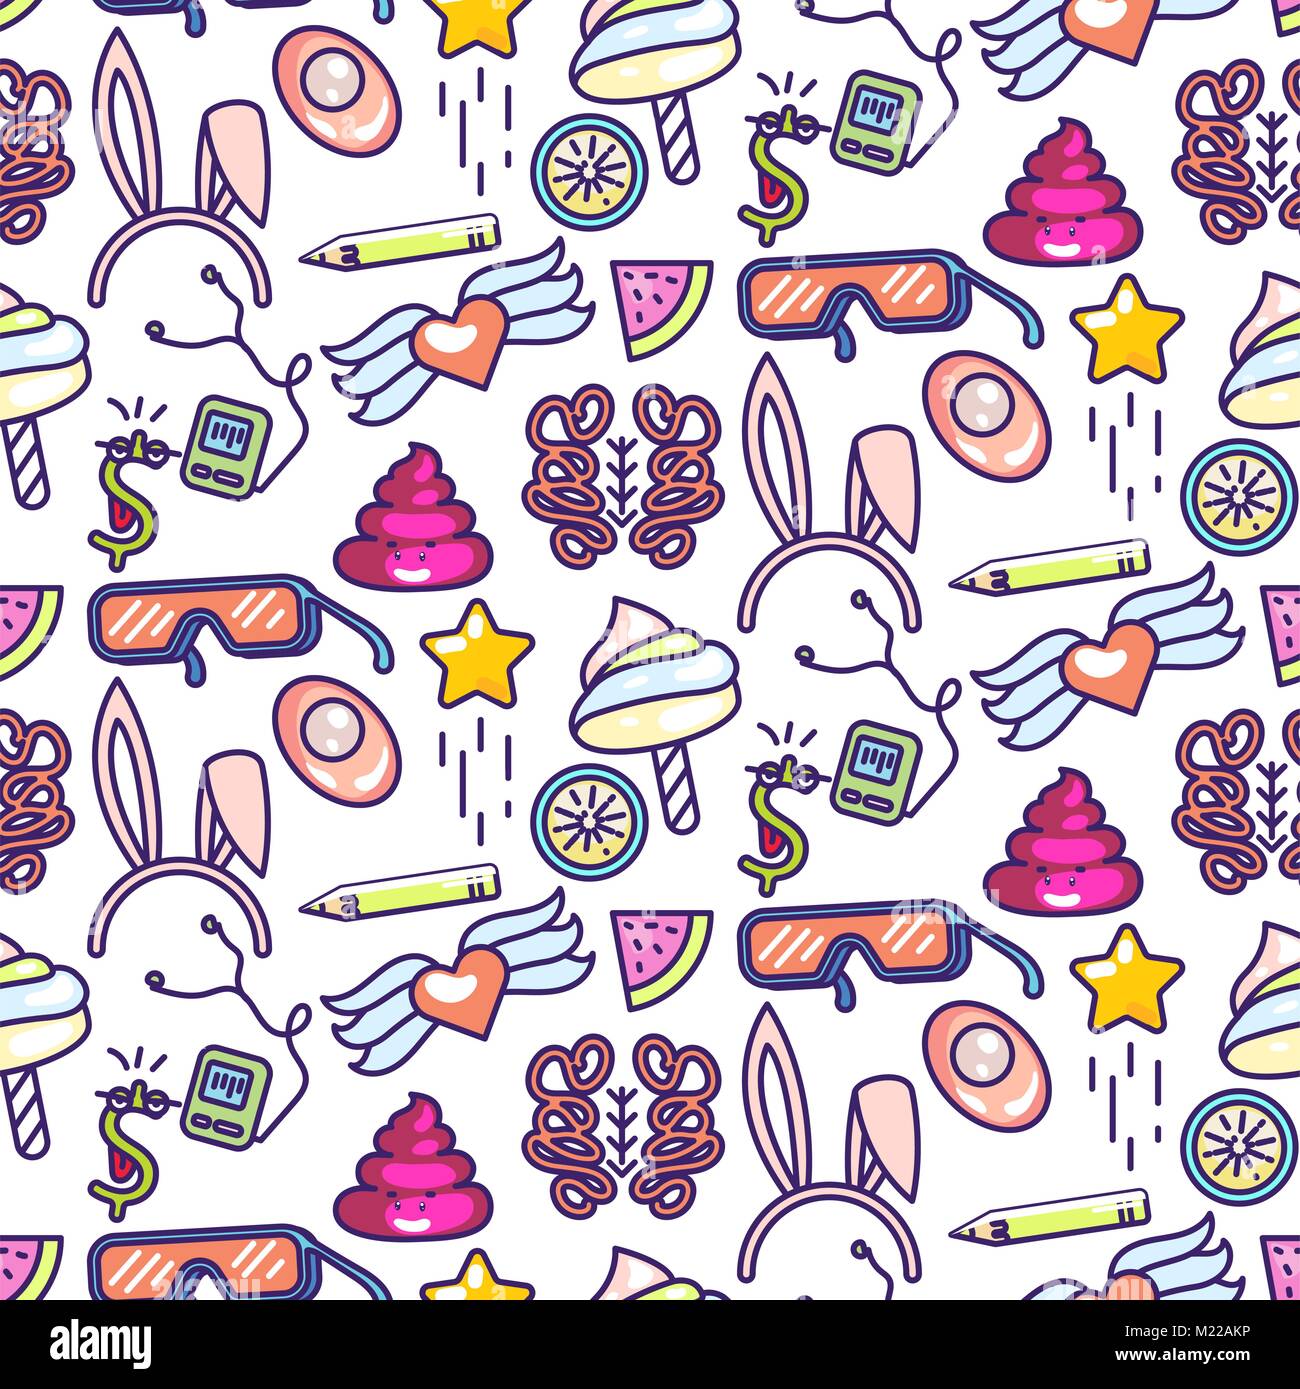 Fun doodles vector icons seamless pattern. Pop art modern style objects. Stock Vector